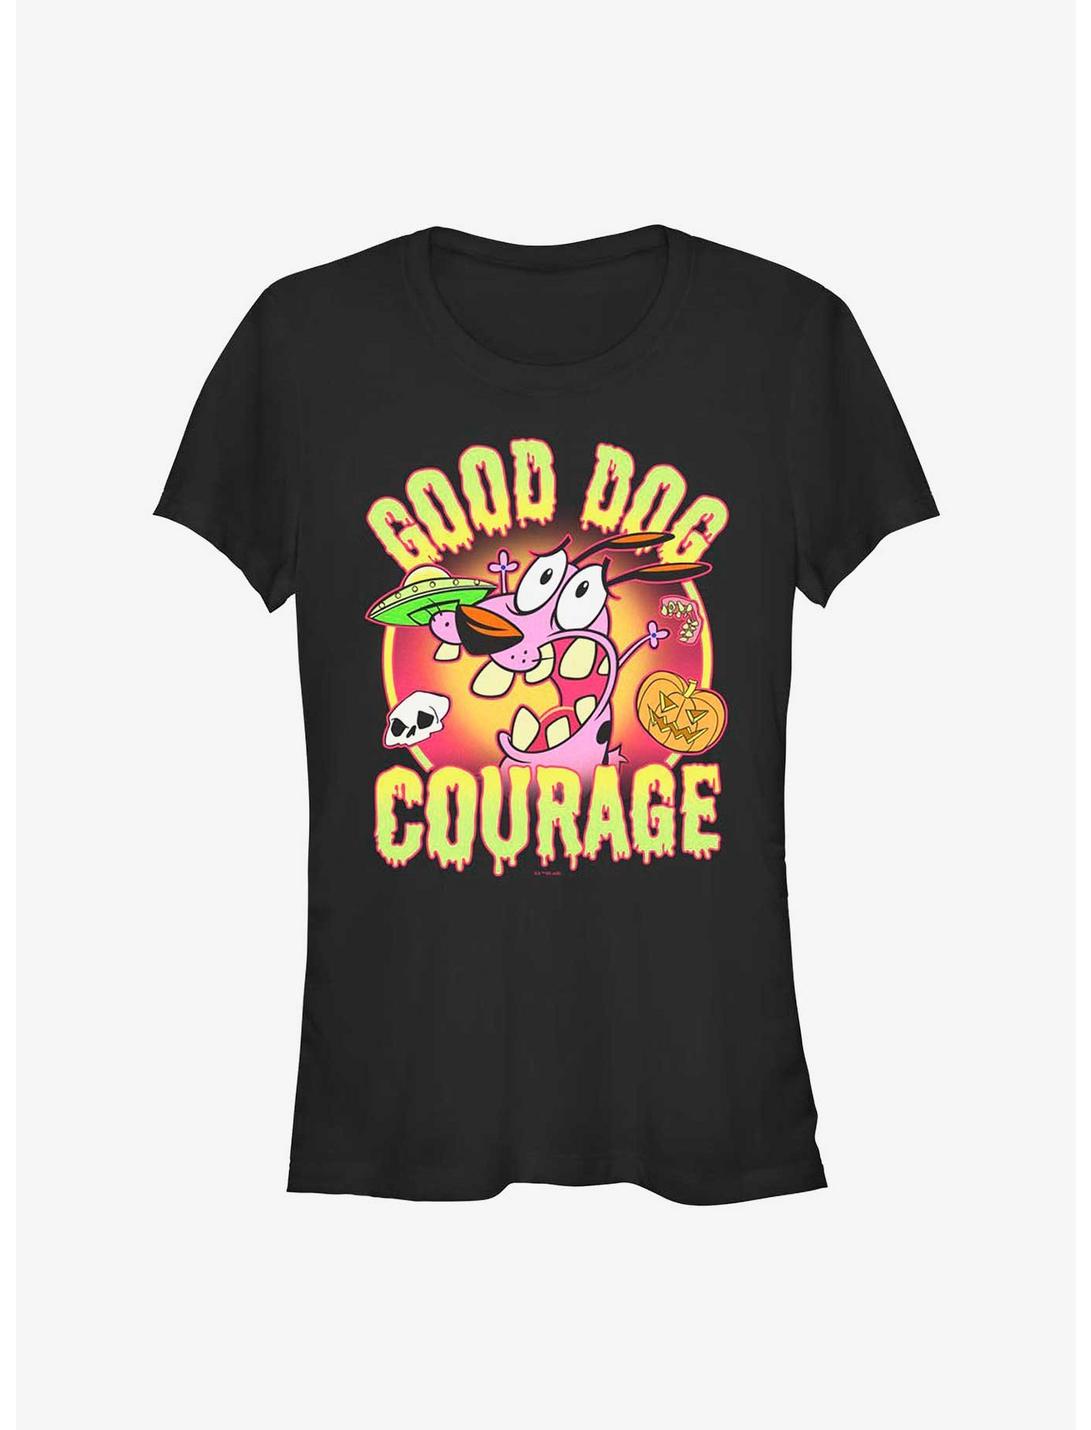 Cartoon Network Courage the Cowardly Dog Good Courage Girls T-Shirt, BLACK, hi-res